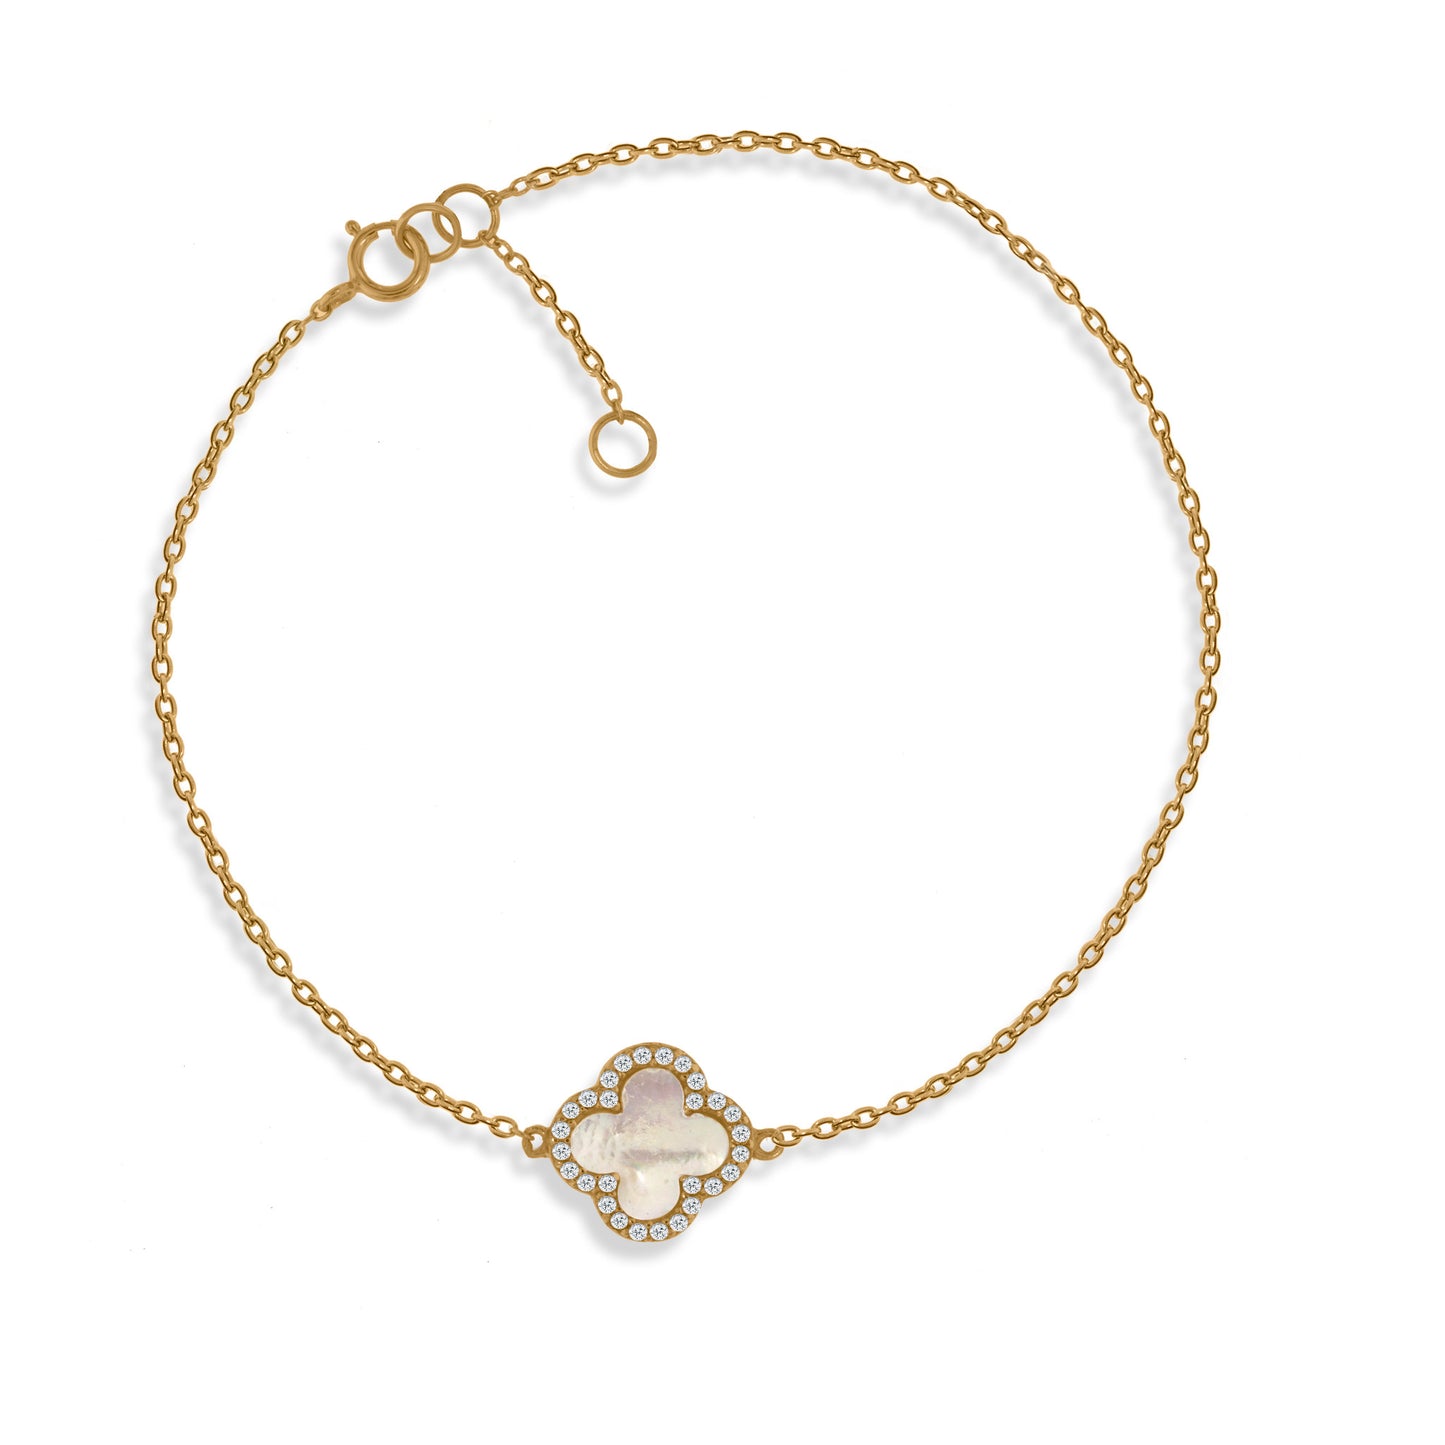 BG-5/G - Chain Bracelet with Mother of Pearl Clover Charm